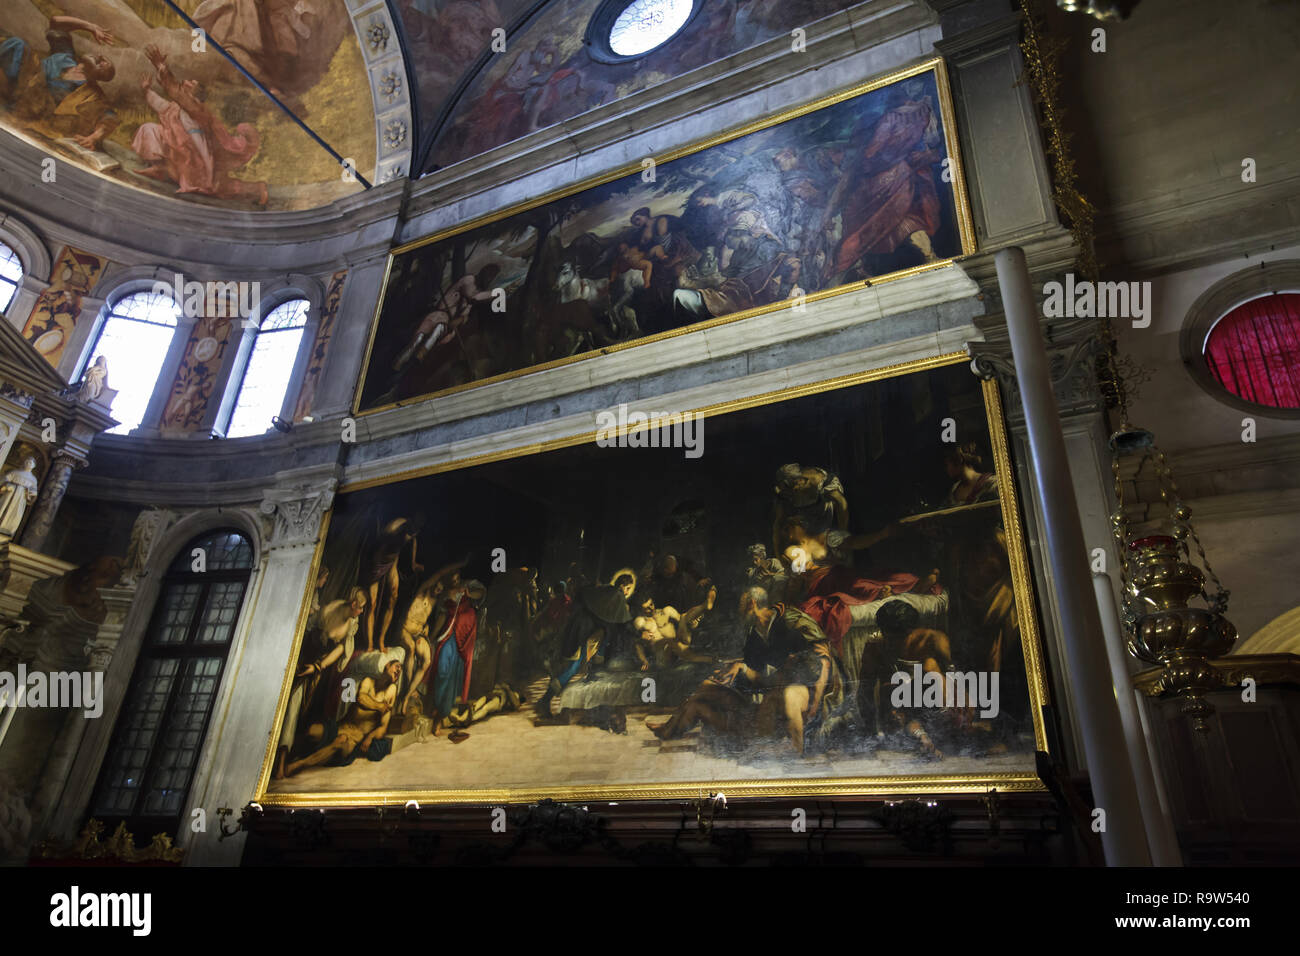 Paintings 'Saint Roch Blessing the Animals' (1567) and 'Saint Roch Healing the Plague-Stricken in the Hospital' (1549) by Venetian Renaissance painter Jacopo Robusti called Tintoretto on display in the Church of Saint Roch (Chiesa di San Rocco) in Venice, Italy. Stock Photo